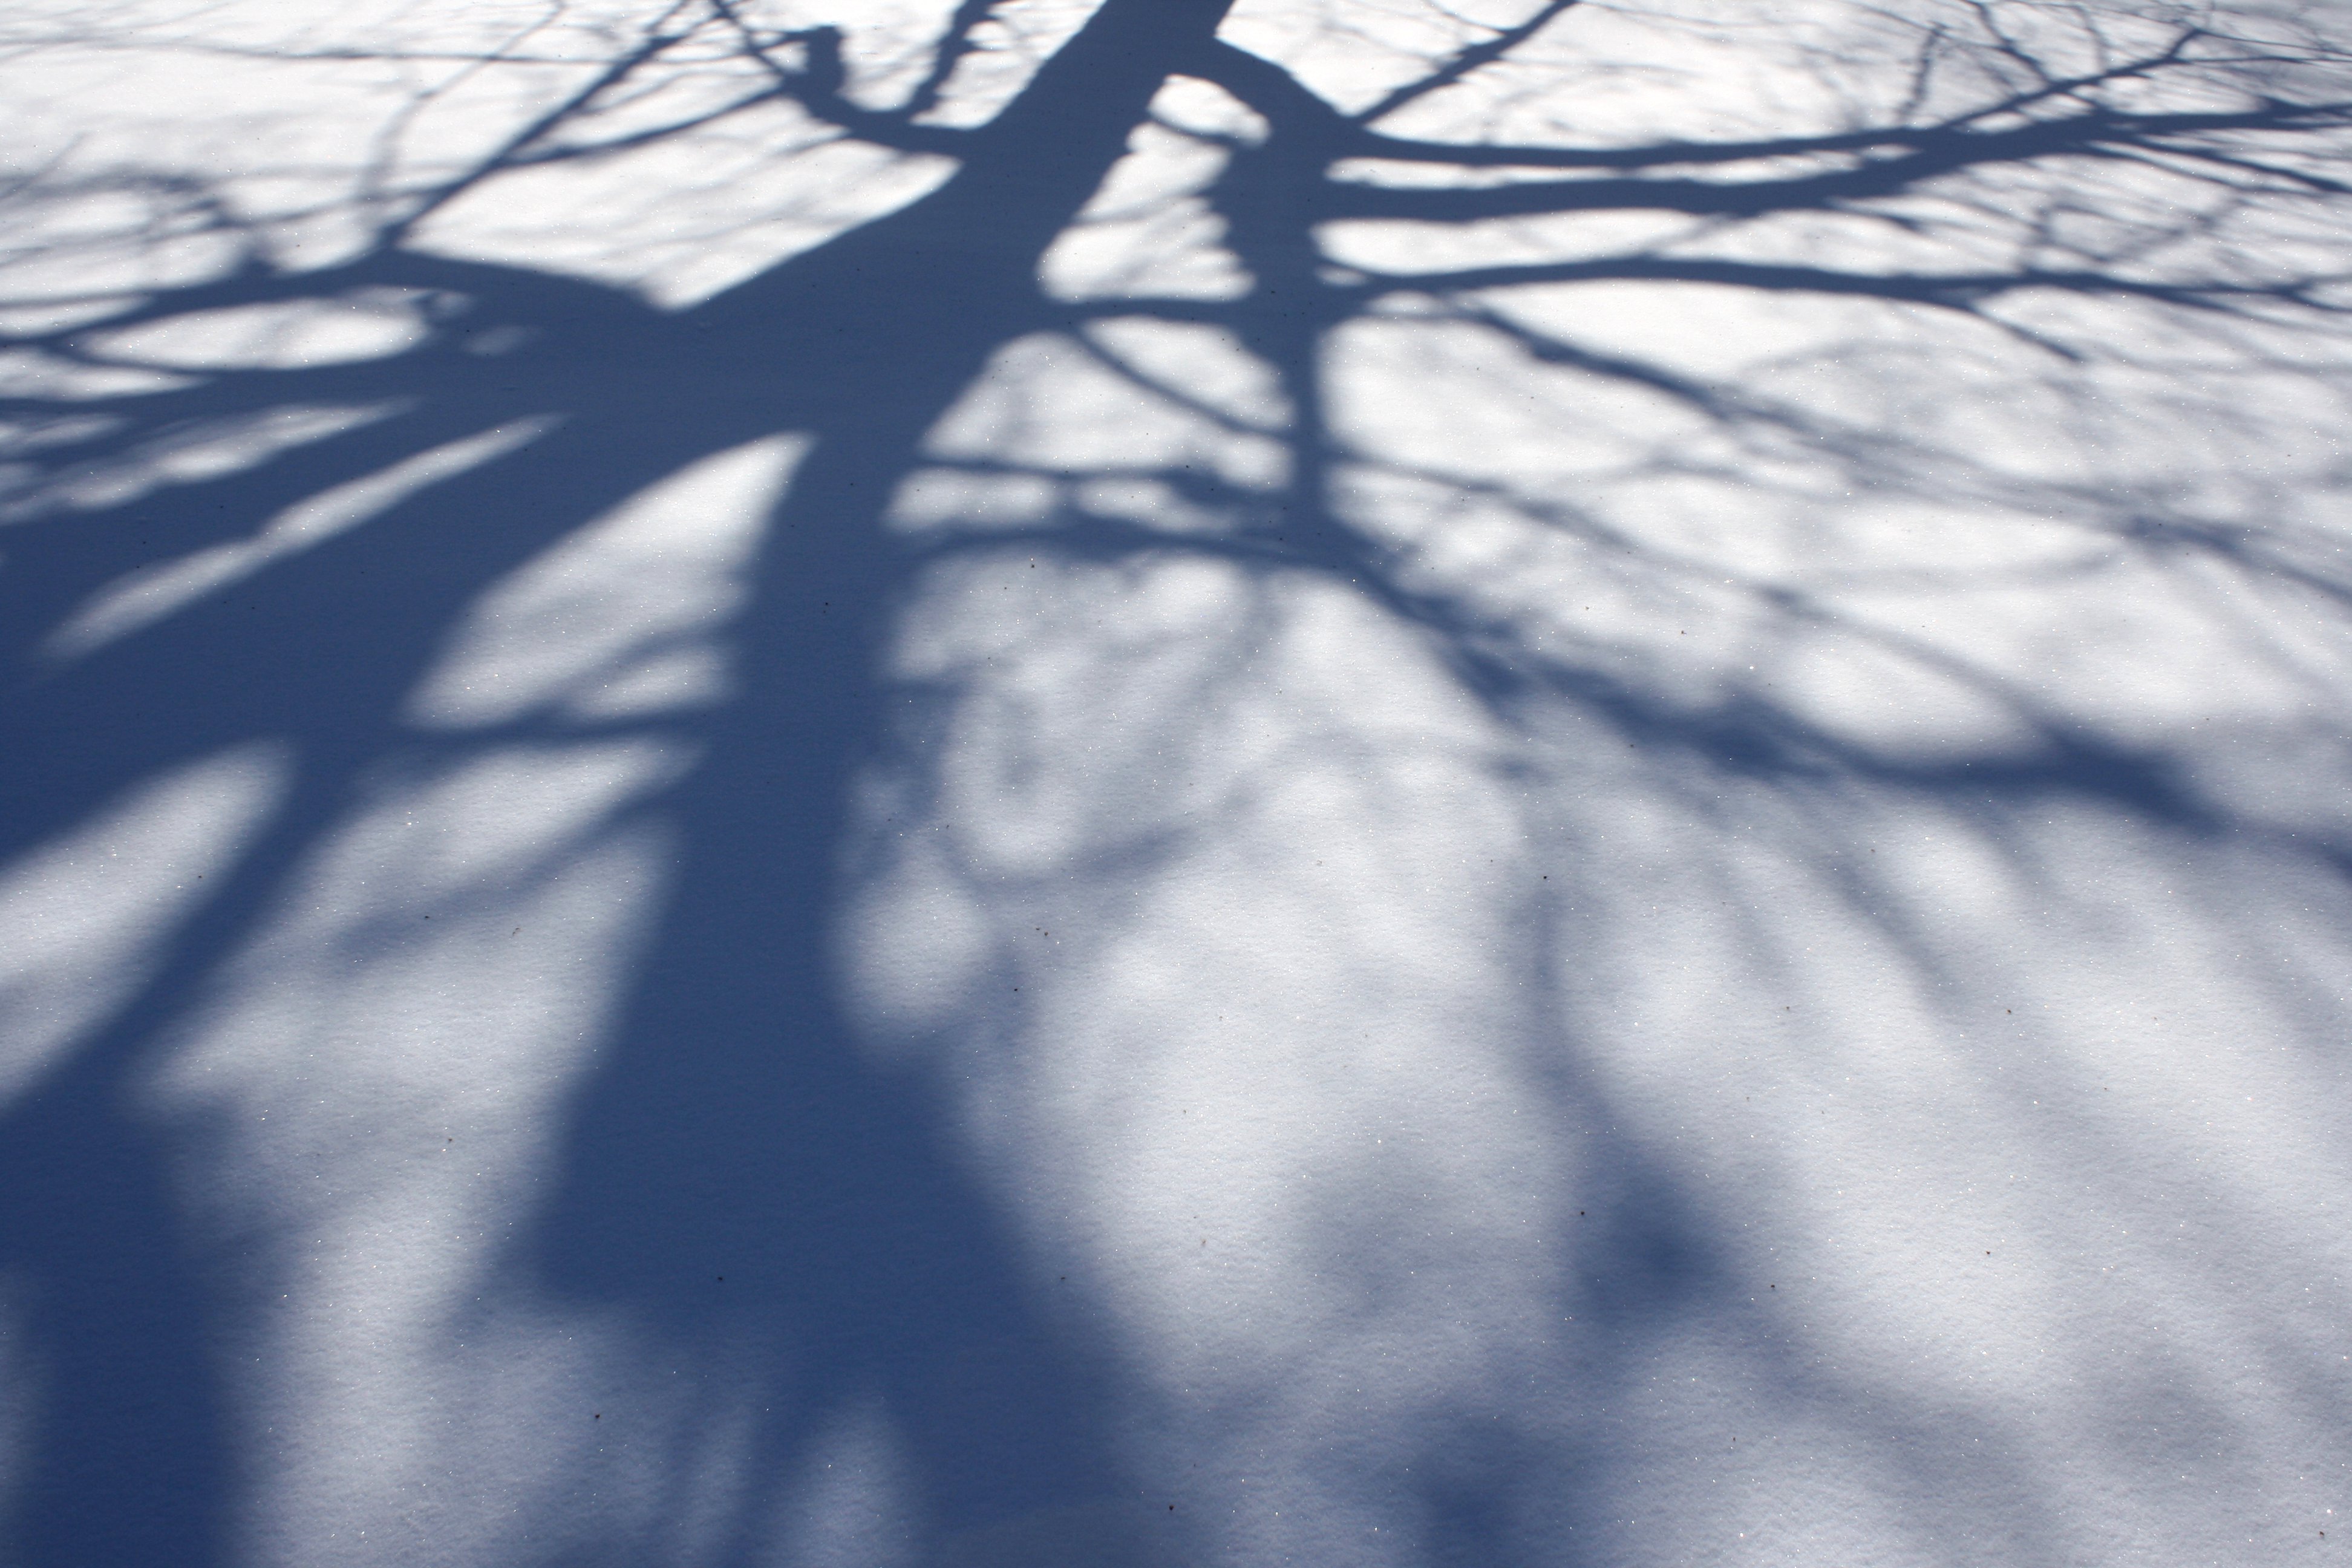 Tree Branch Shadows on Snow Texture Picture. Free Photograph. Photo Public Domain